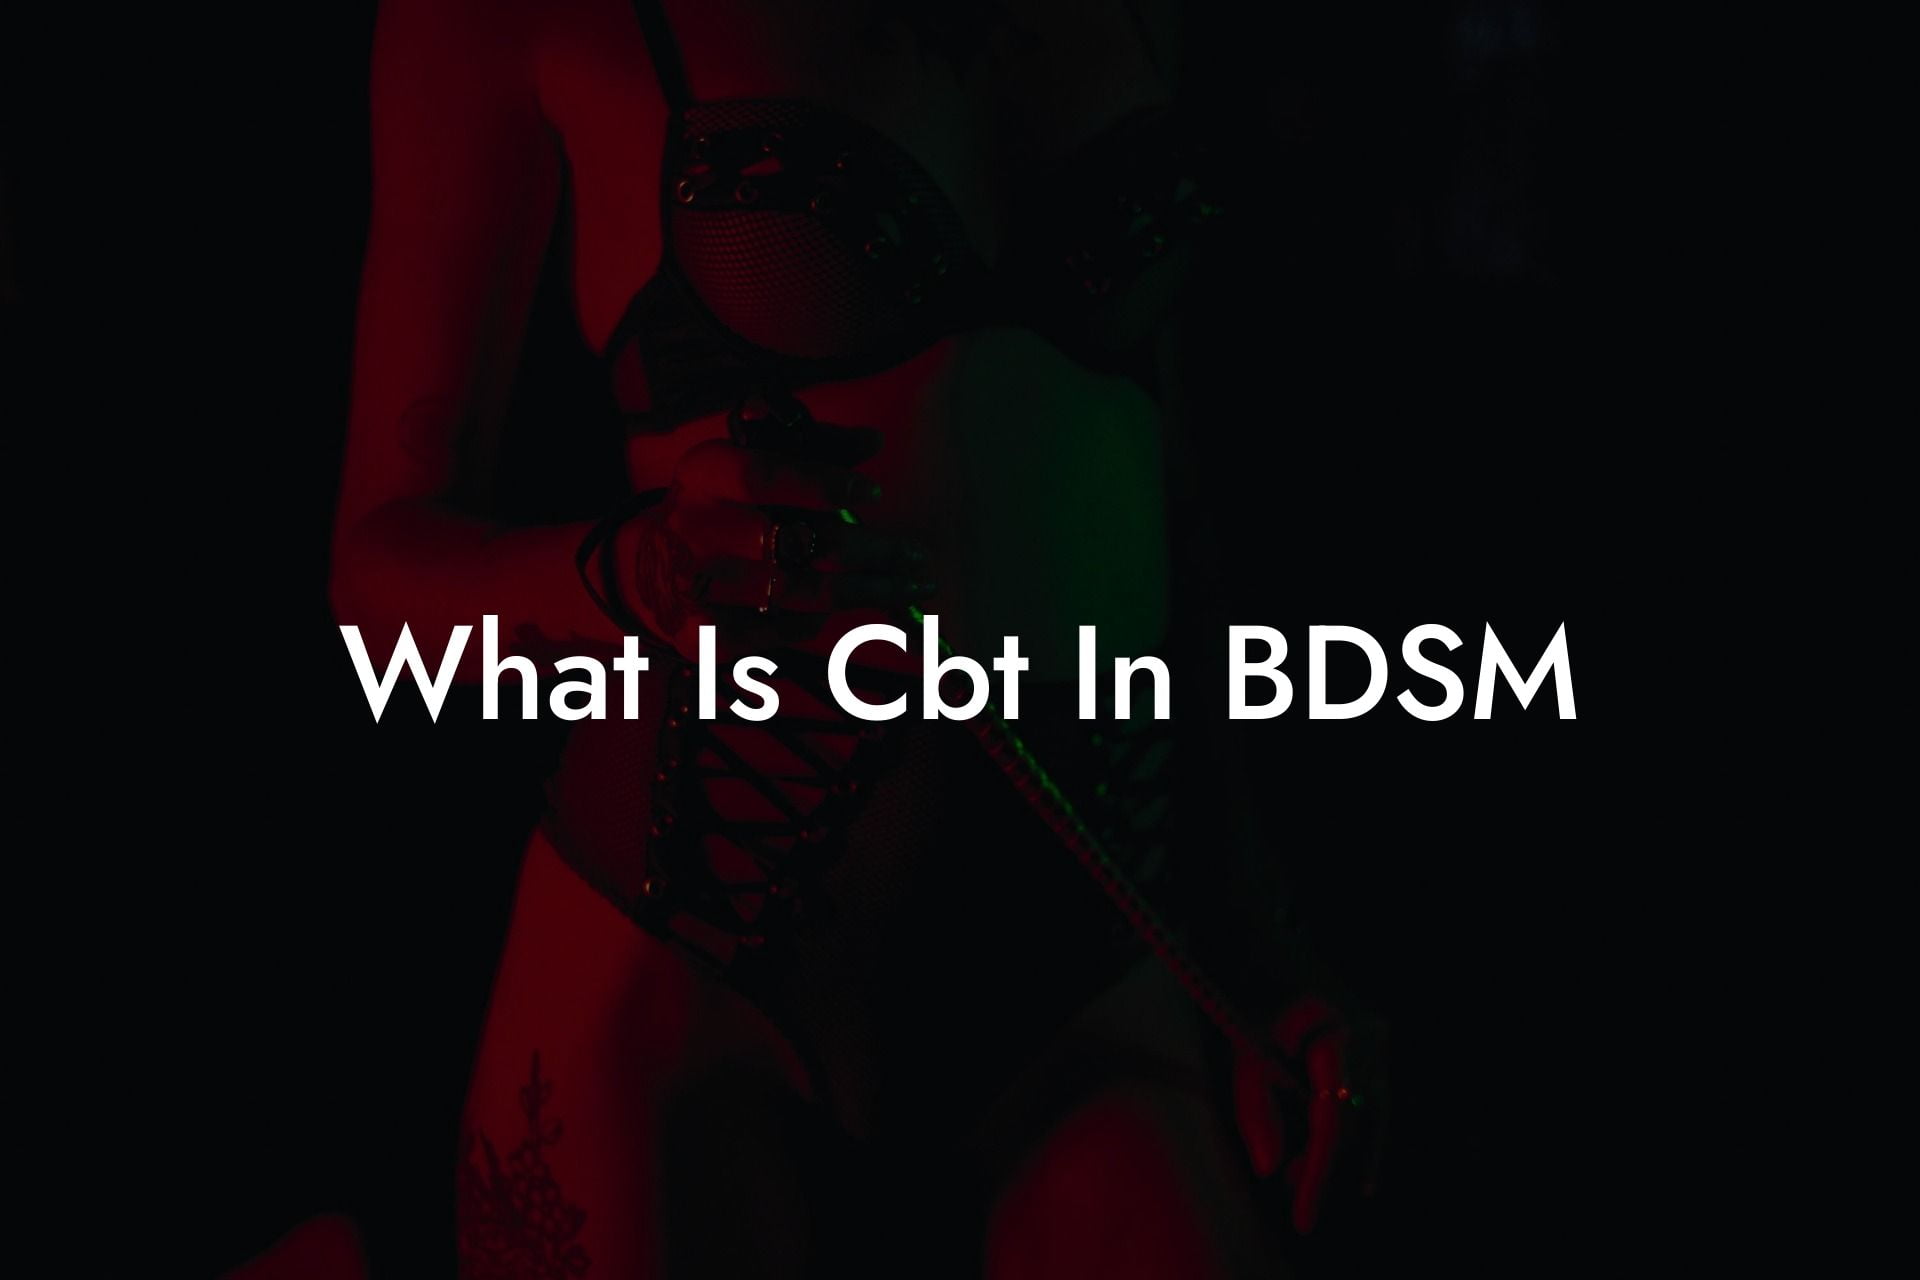 What Is Cbt In BDSM